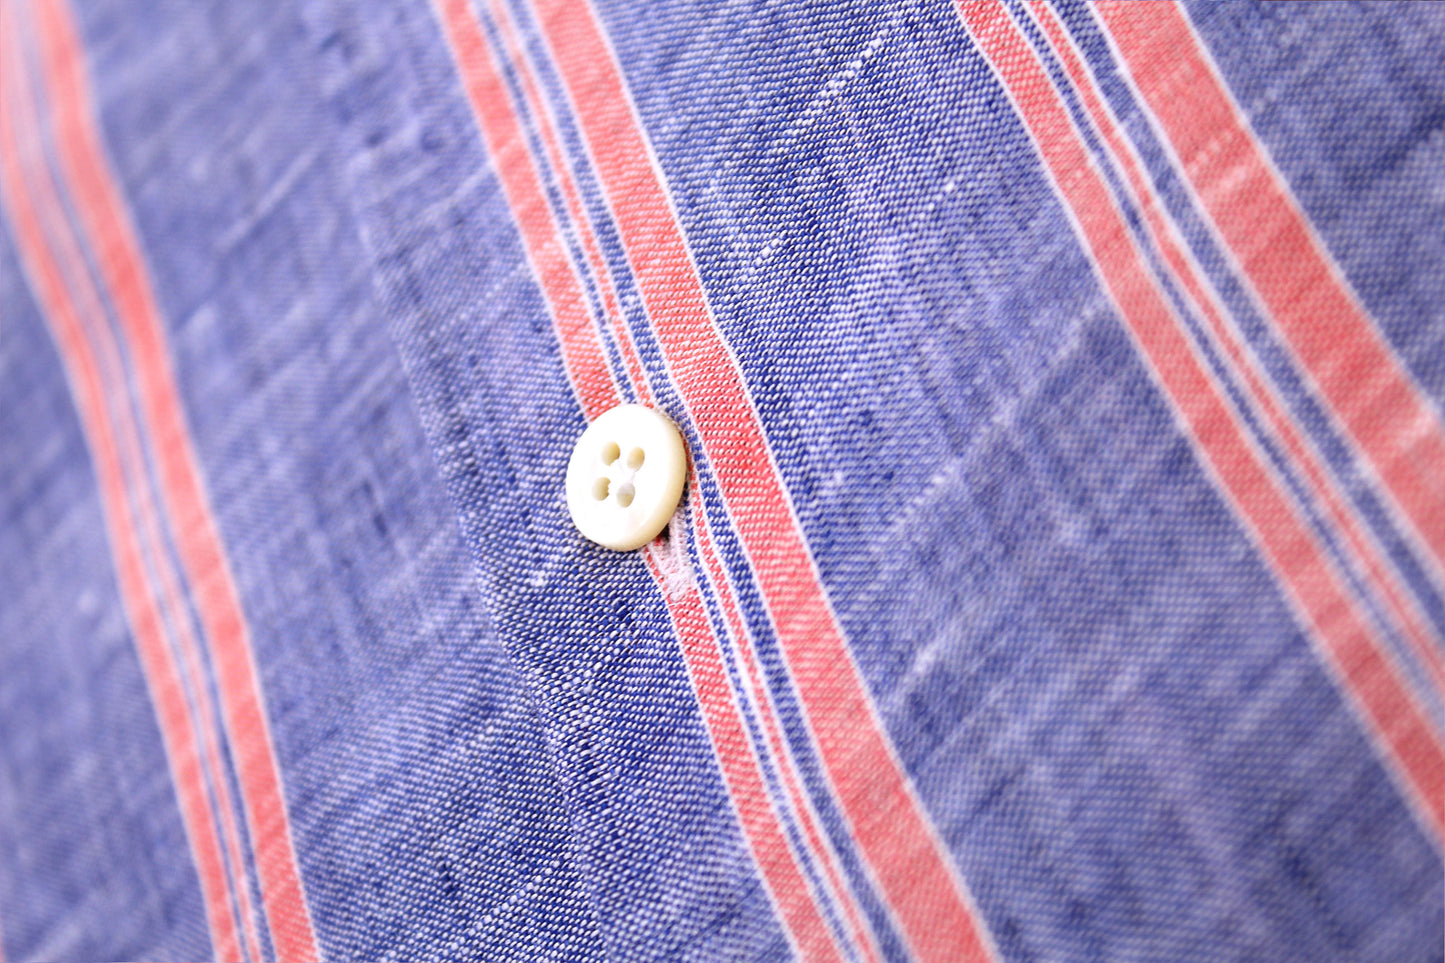 Hand Finished Navy With Rose Striped Italian Linen Sport Shirt